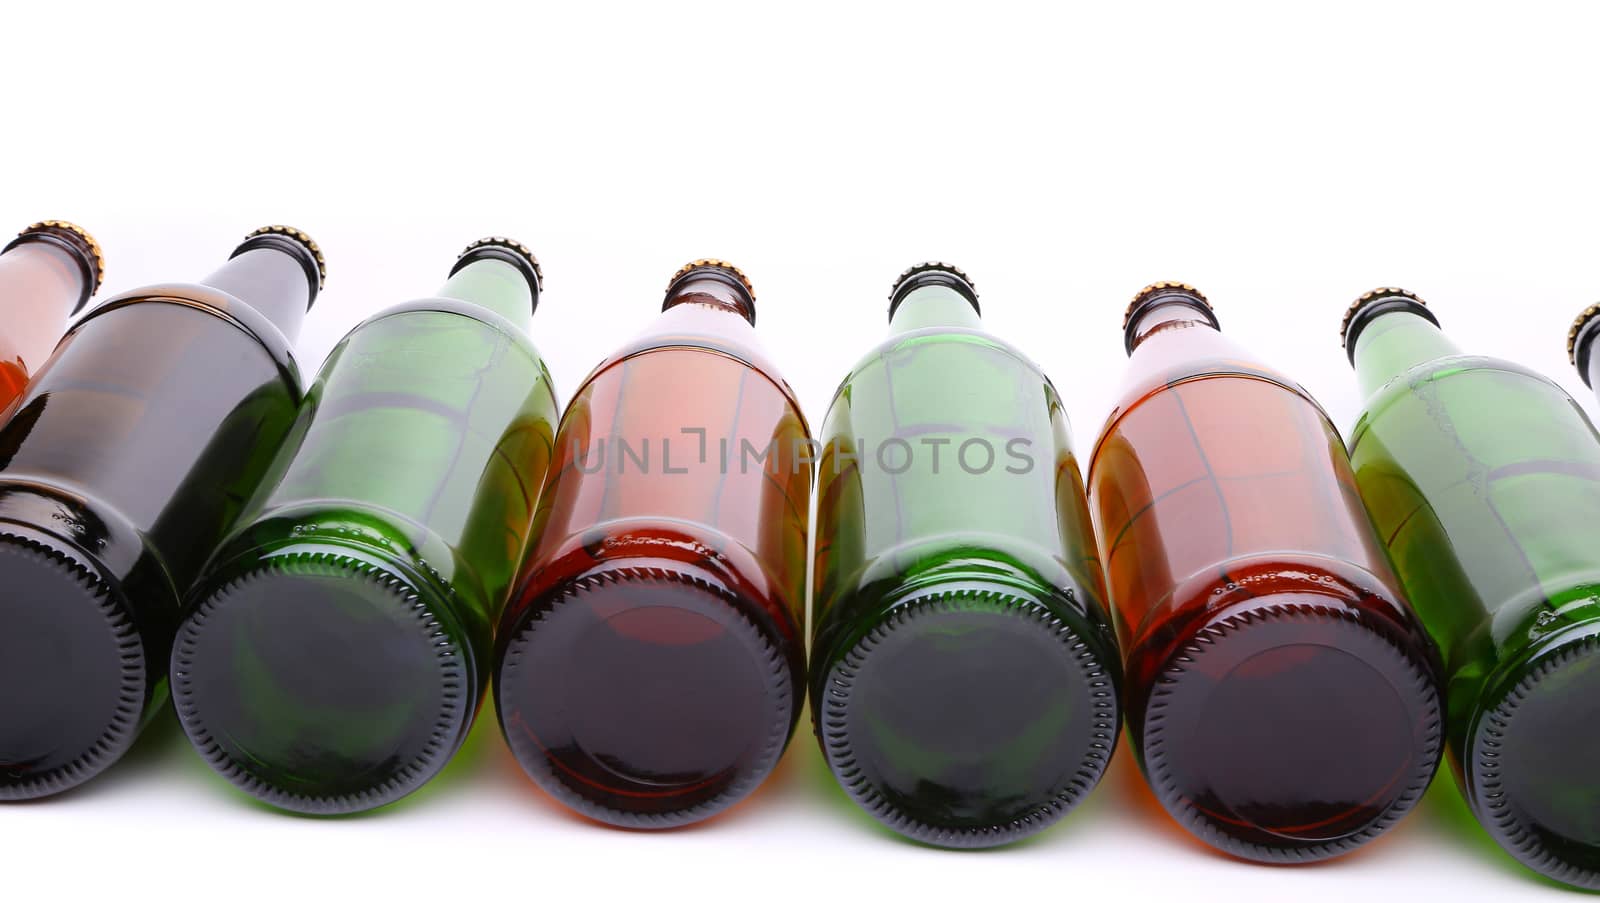 Bottles lying in perspective by indigolotos